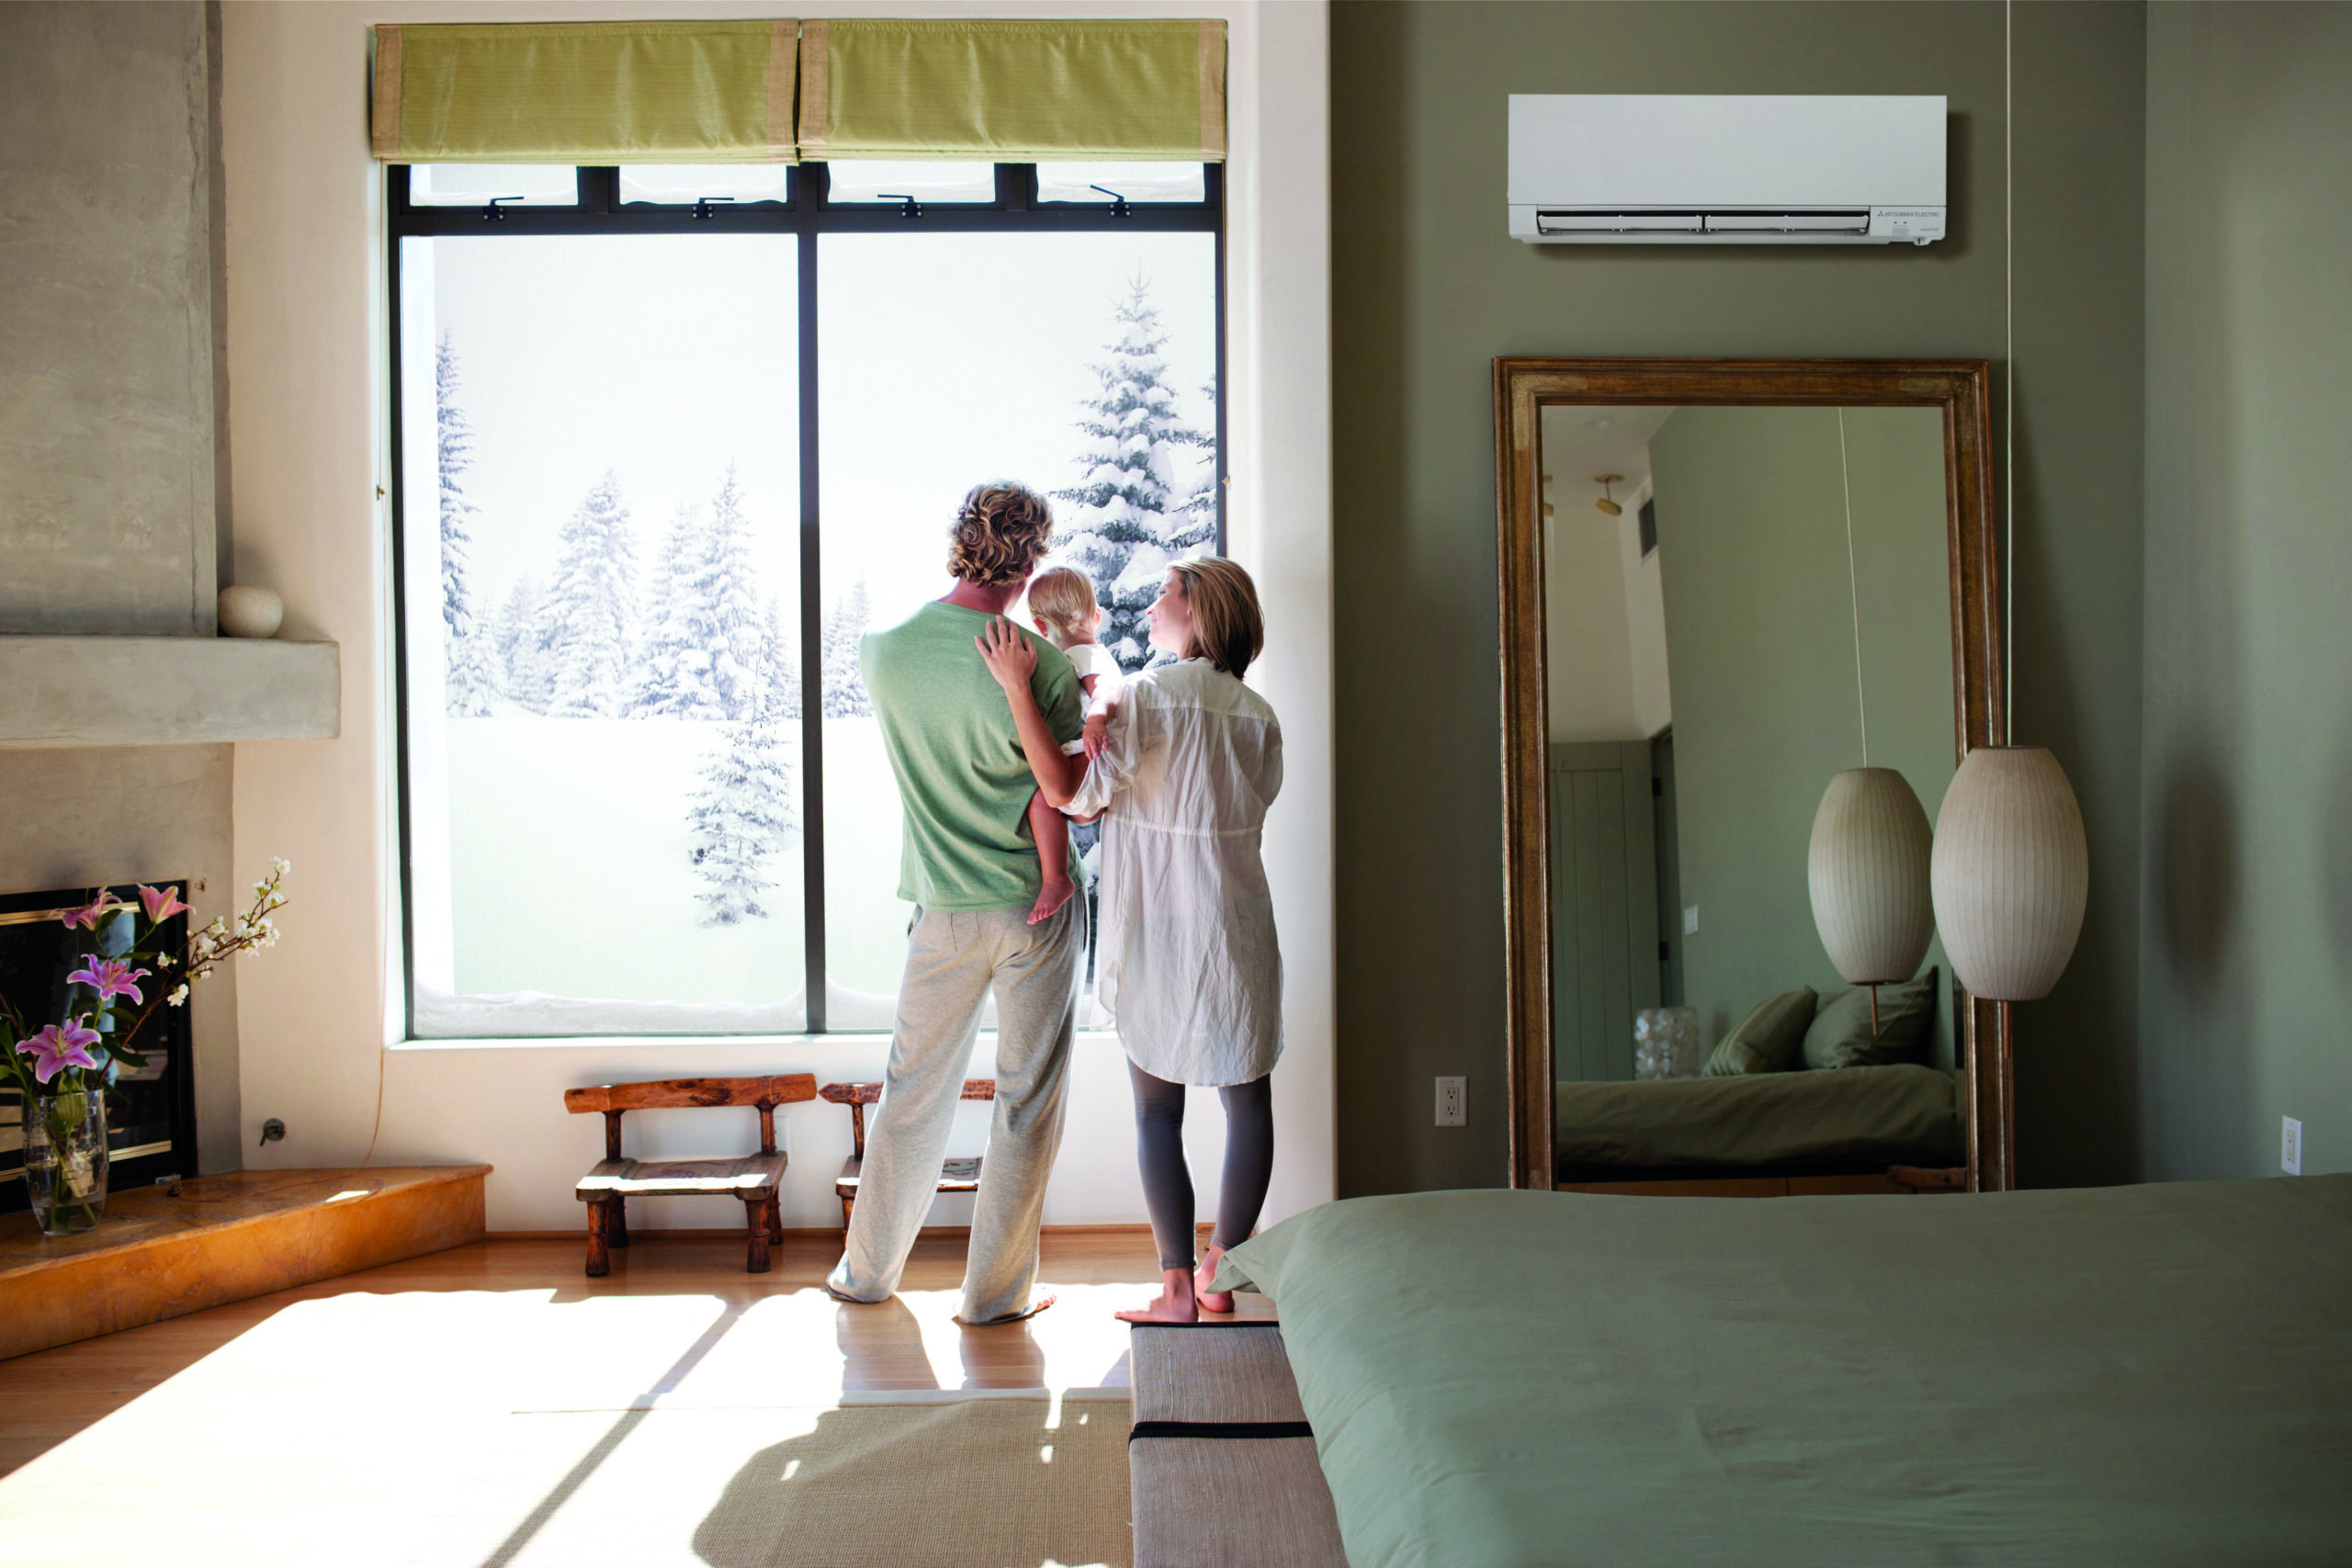 Ductless HVAC heating a residential bedroom